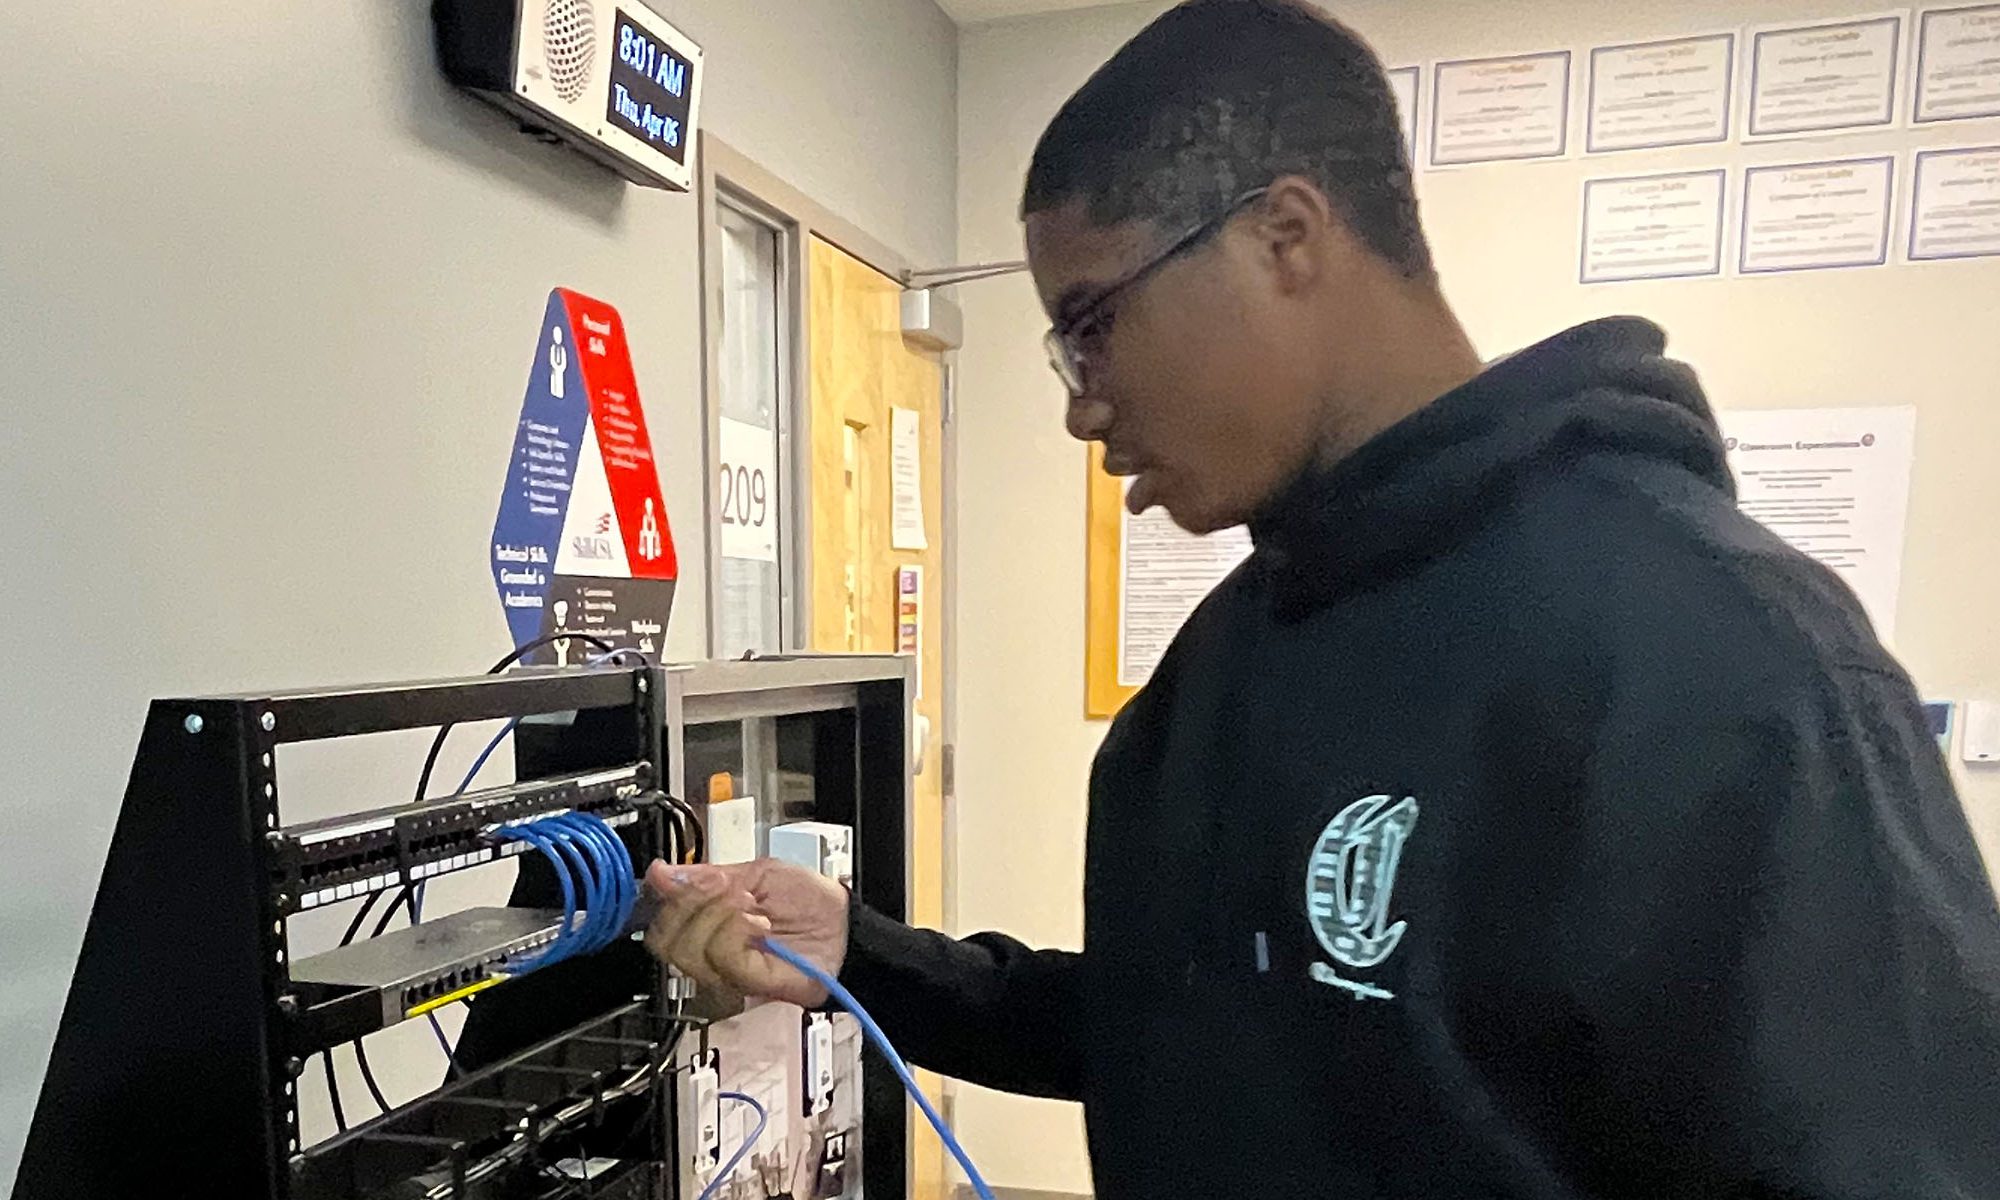 A student in a navy blue hoodie works on a cable networking exercise.